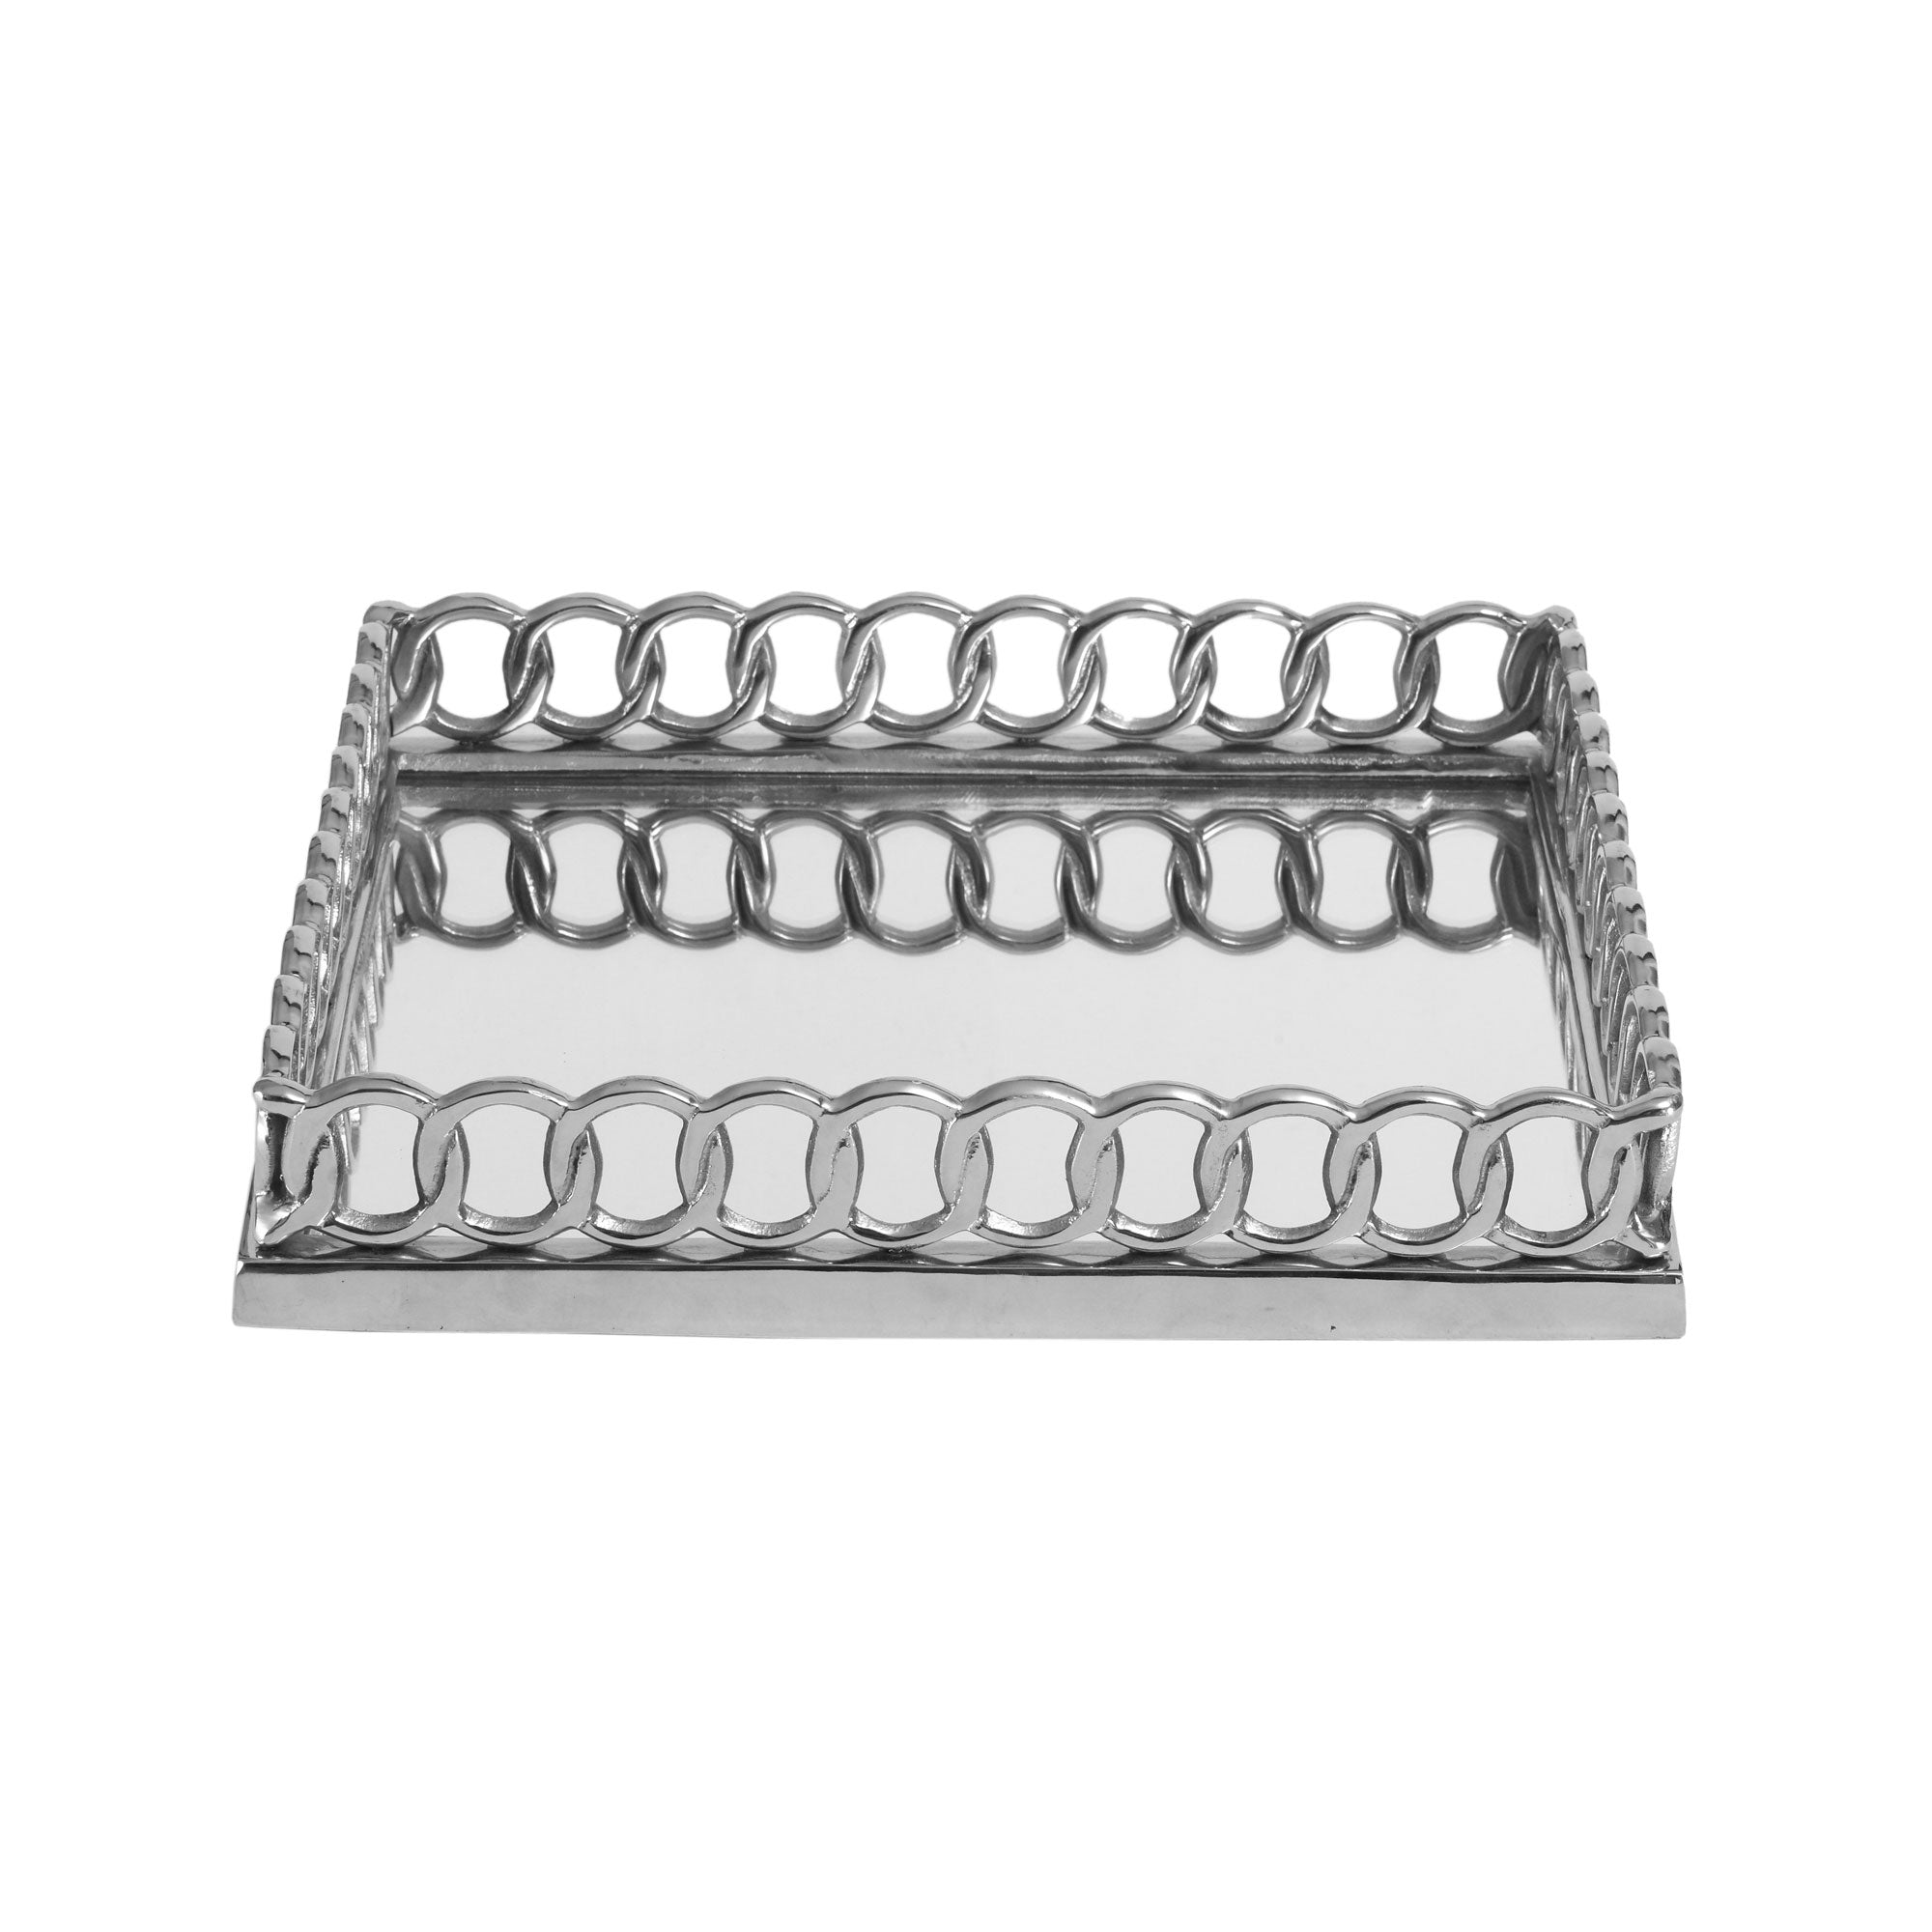 Chain Link Tray - Mirrored Small